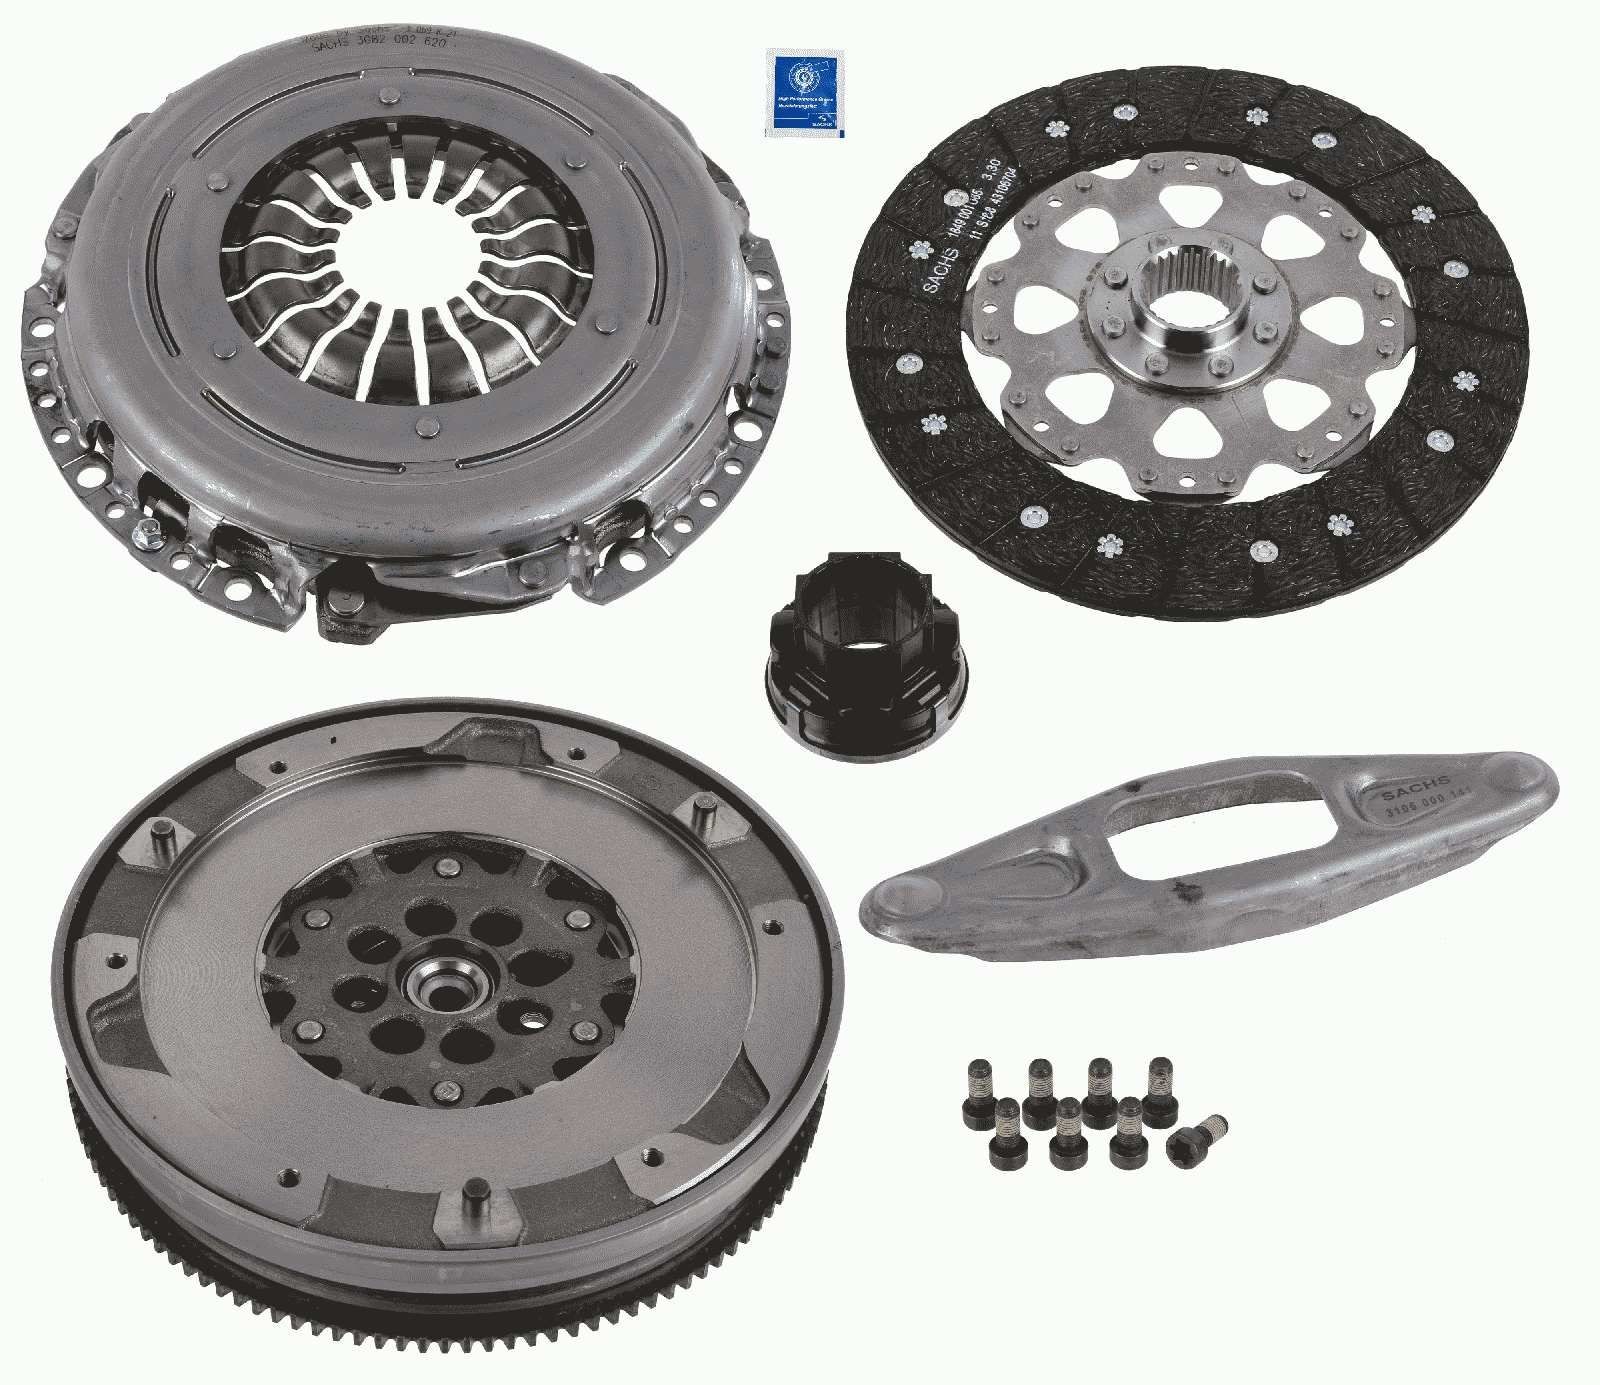 SACHS Clutch replacement kit BMW 1 Hatchback (F20) new 2290 601 146